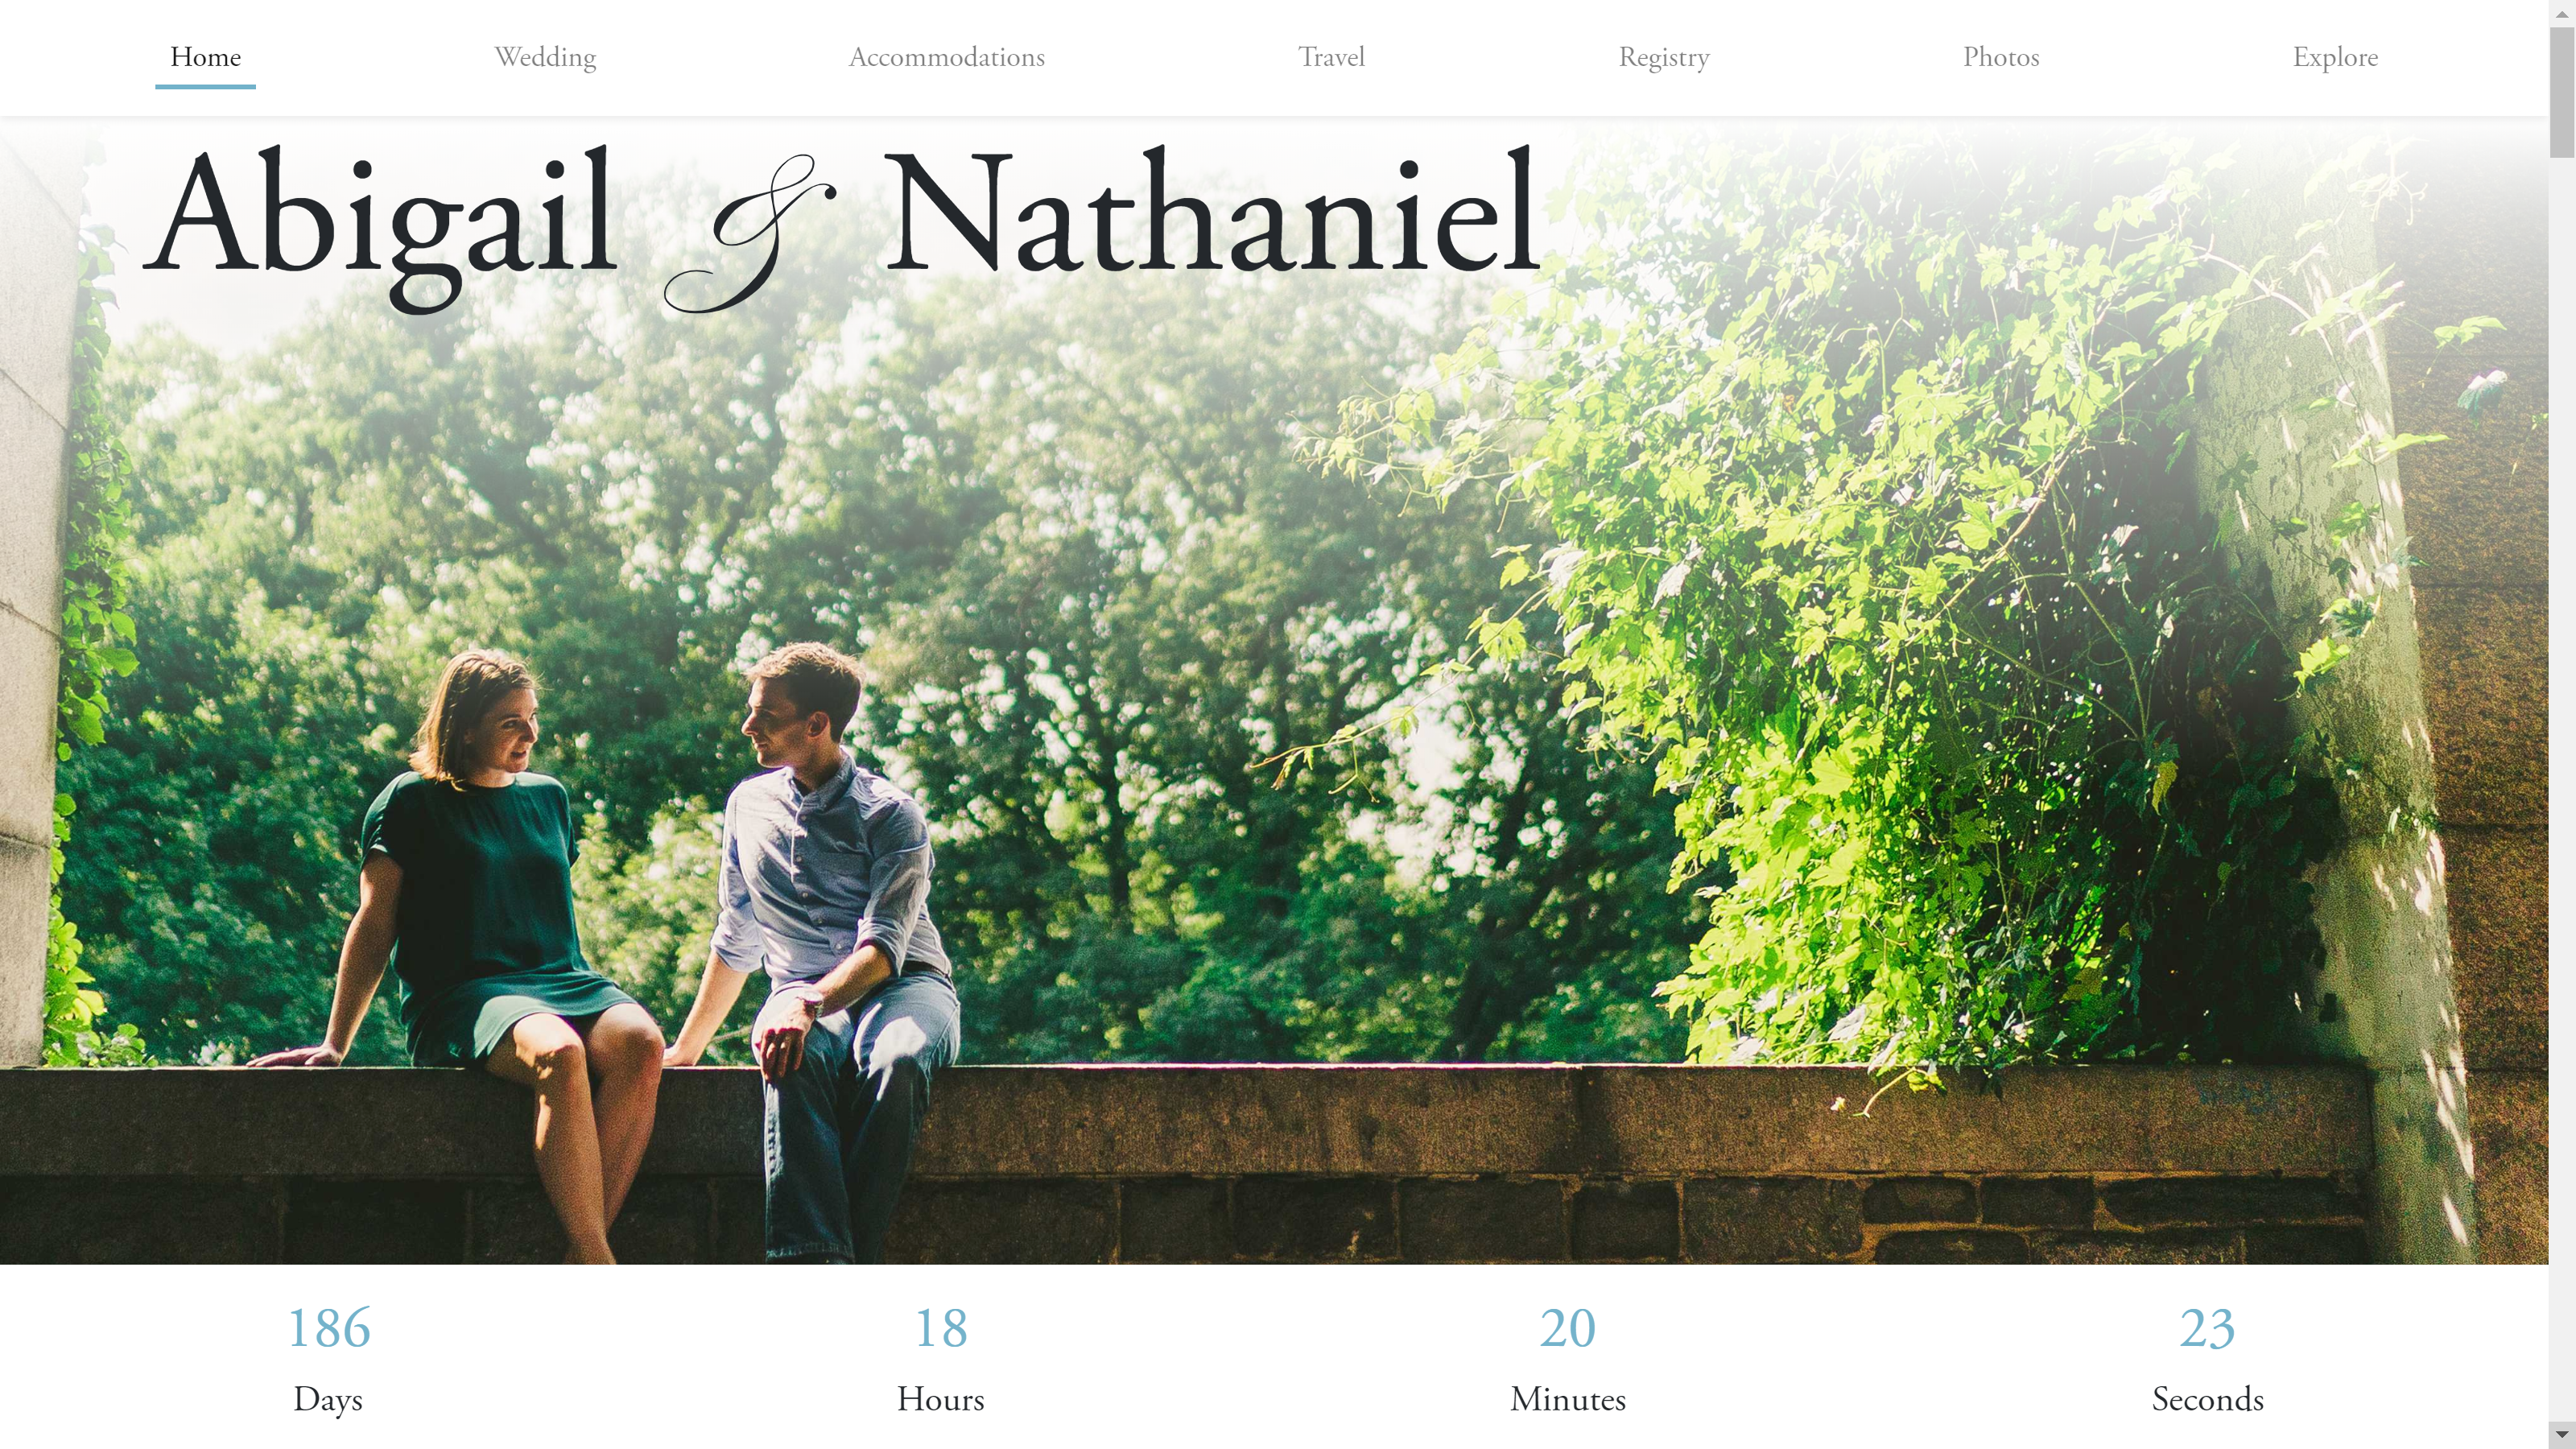 The home screen of abigailandnathaniel.com, featuring an image of a couple sitting on a stone wall with a wedding countdown timer.